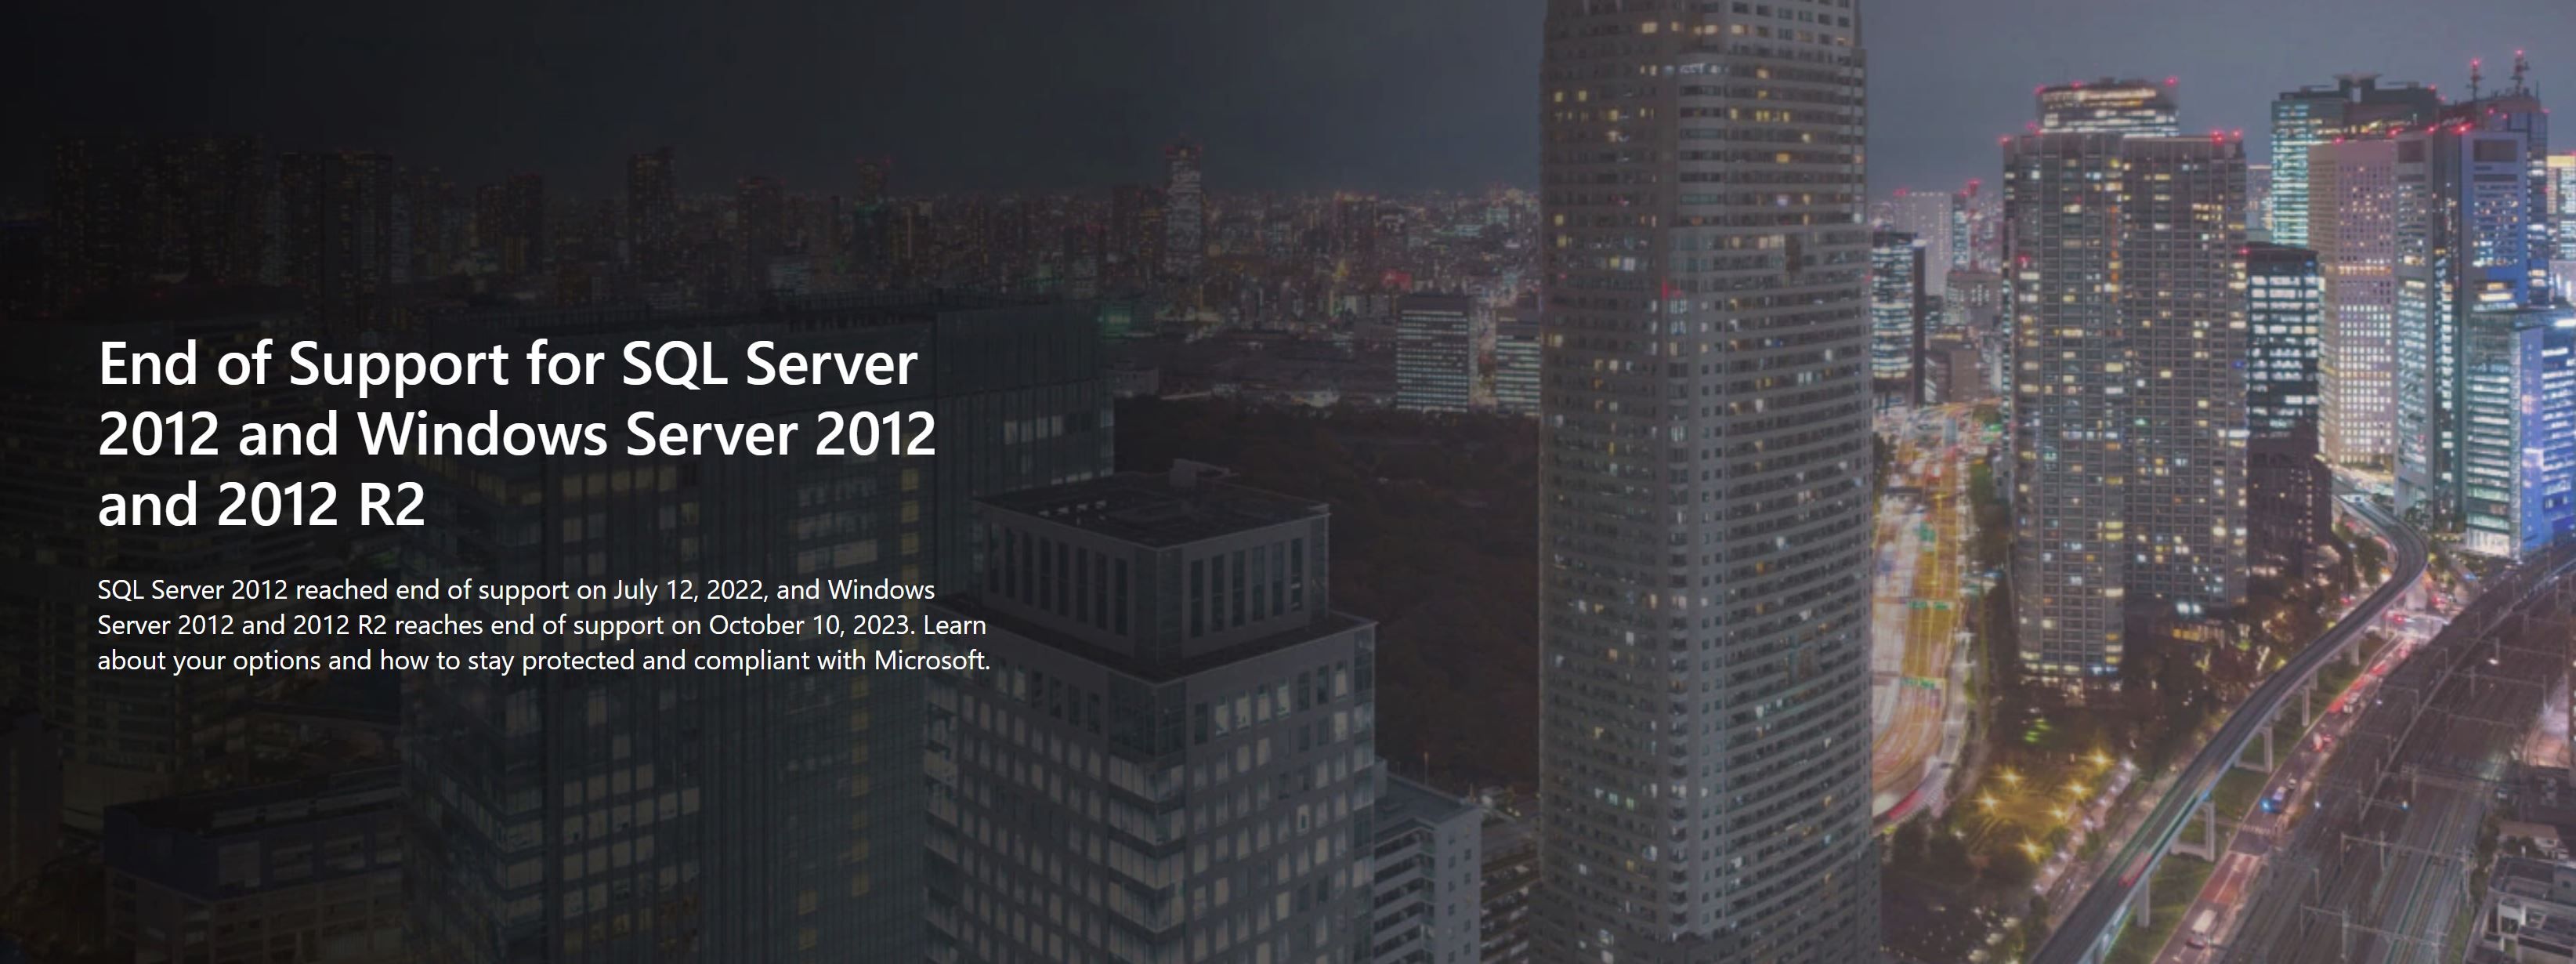 Three options to prepare for Windows Server 2012/R2 end of support -  Microsoft Community Hub